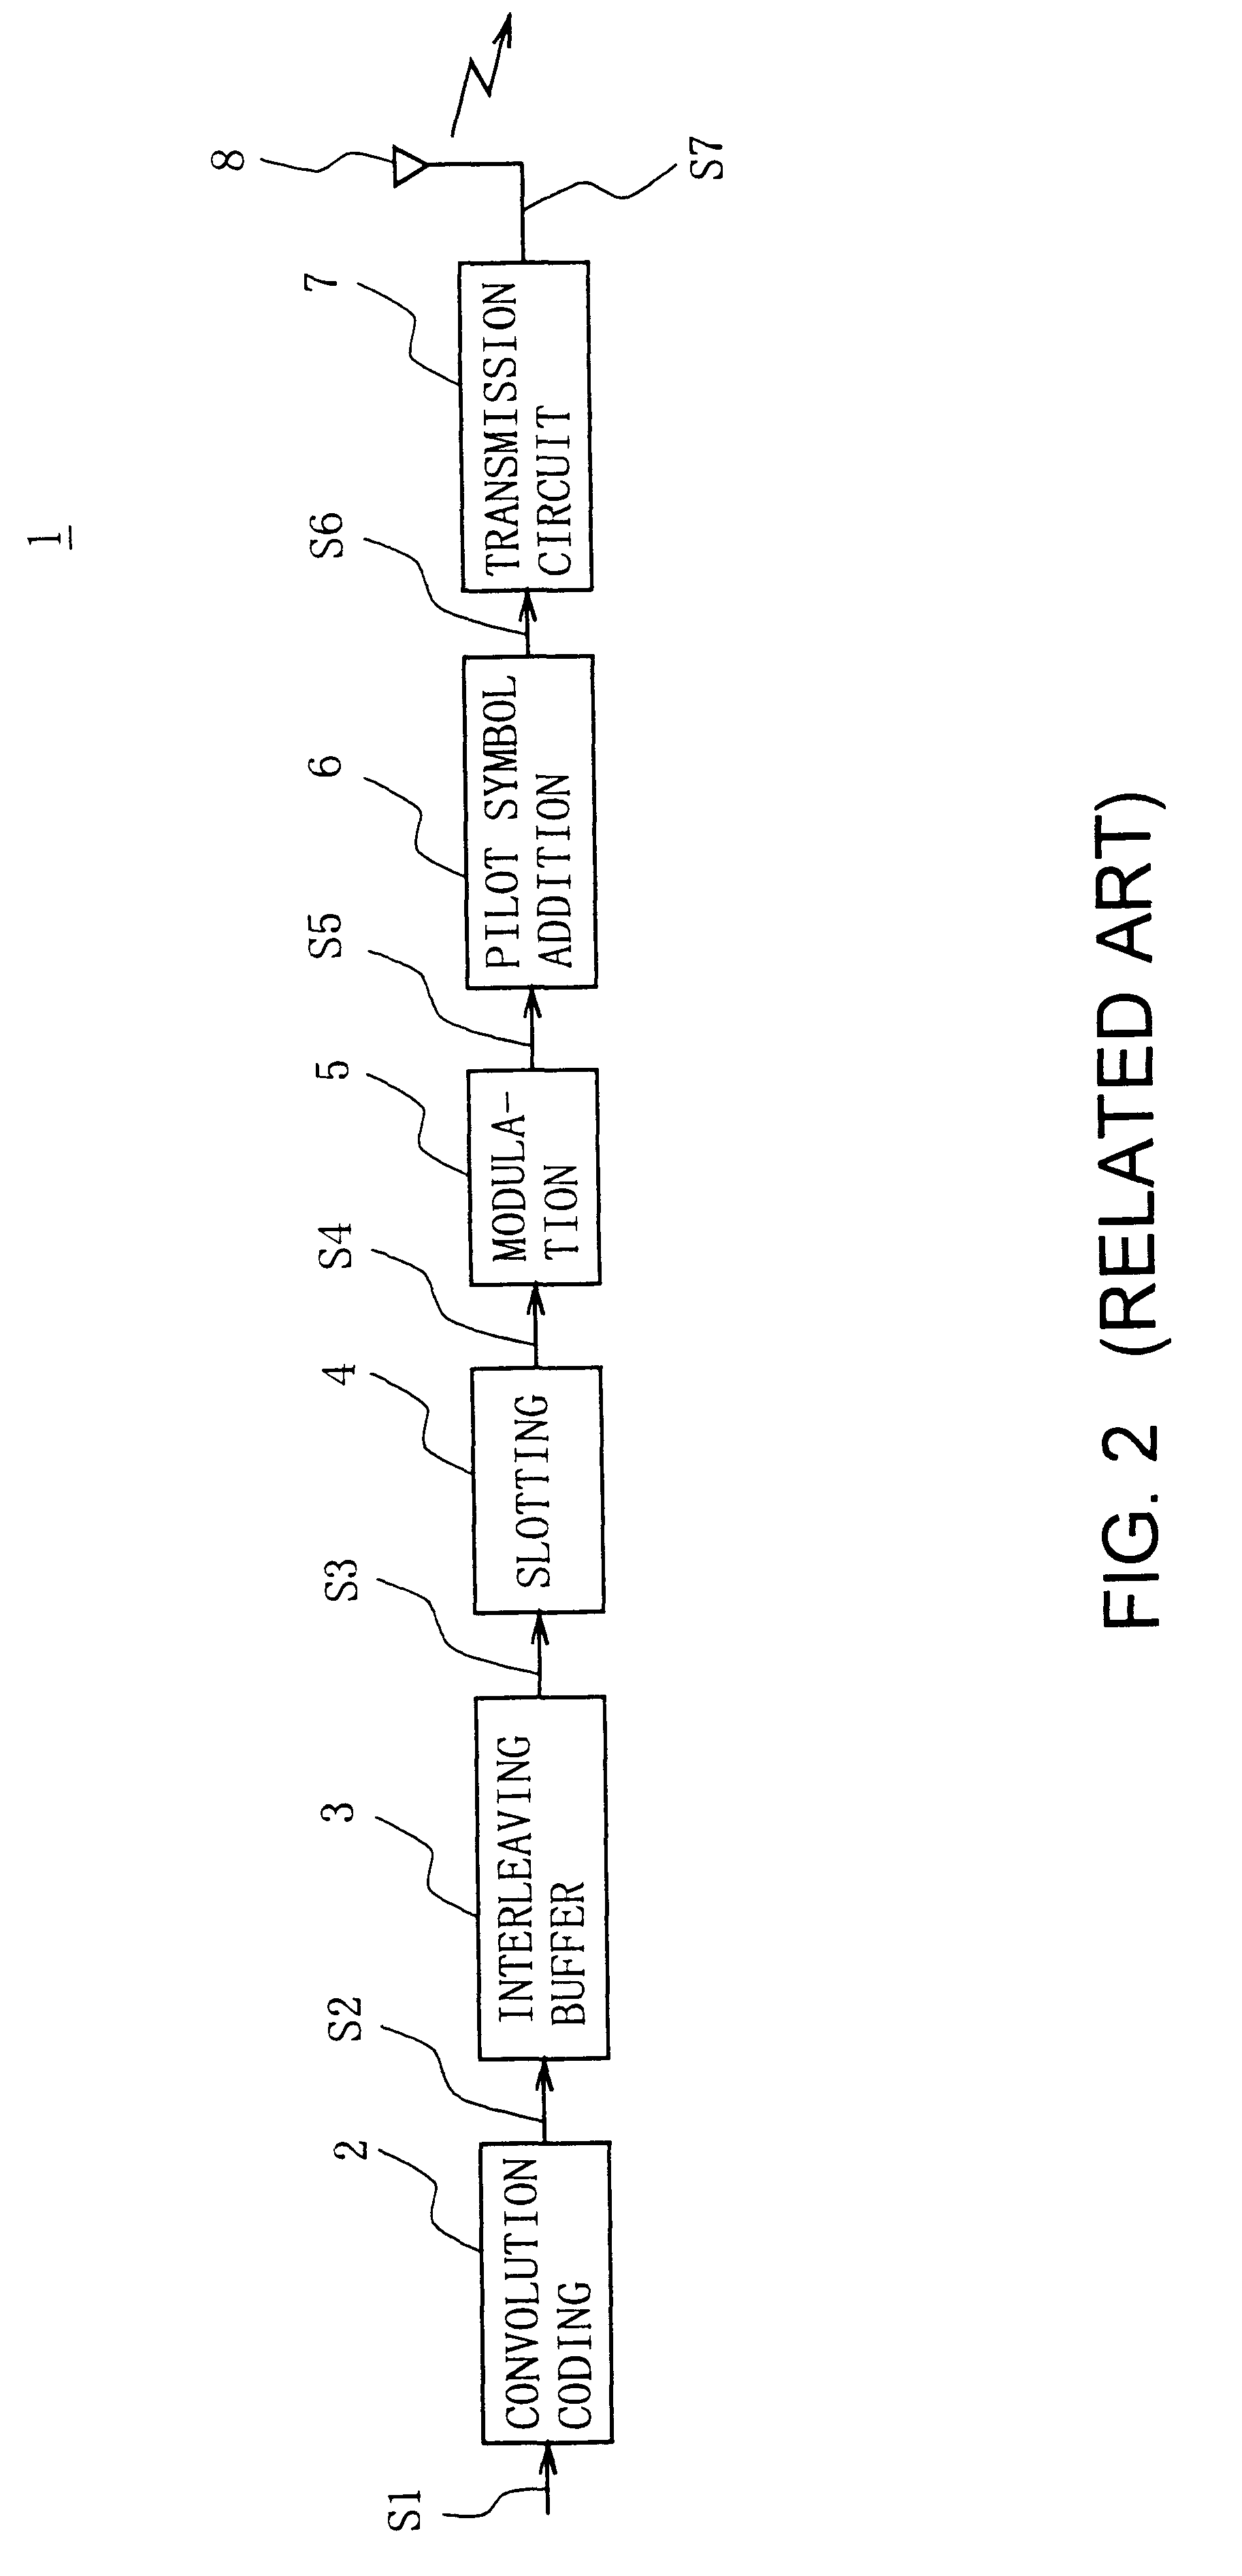 Receiver, transmitter-receiver, and communication method